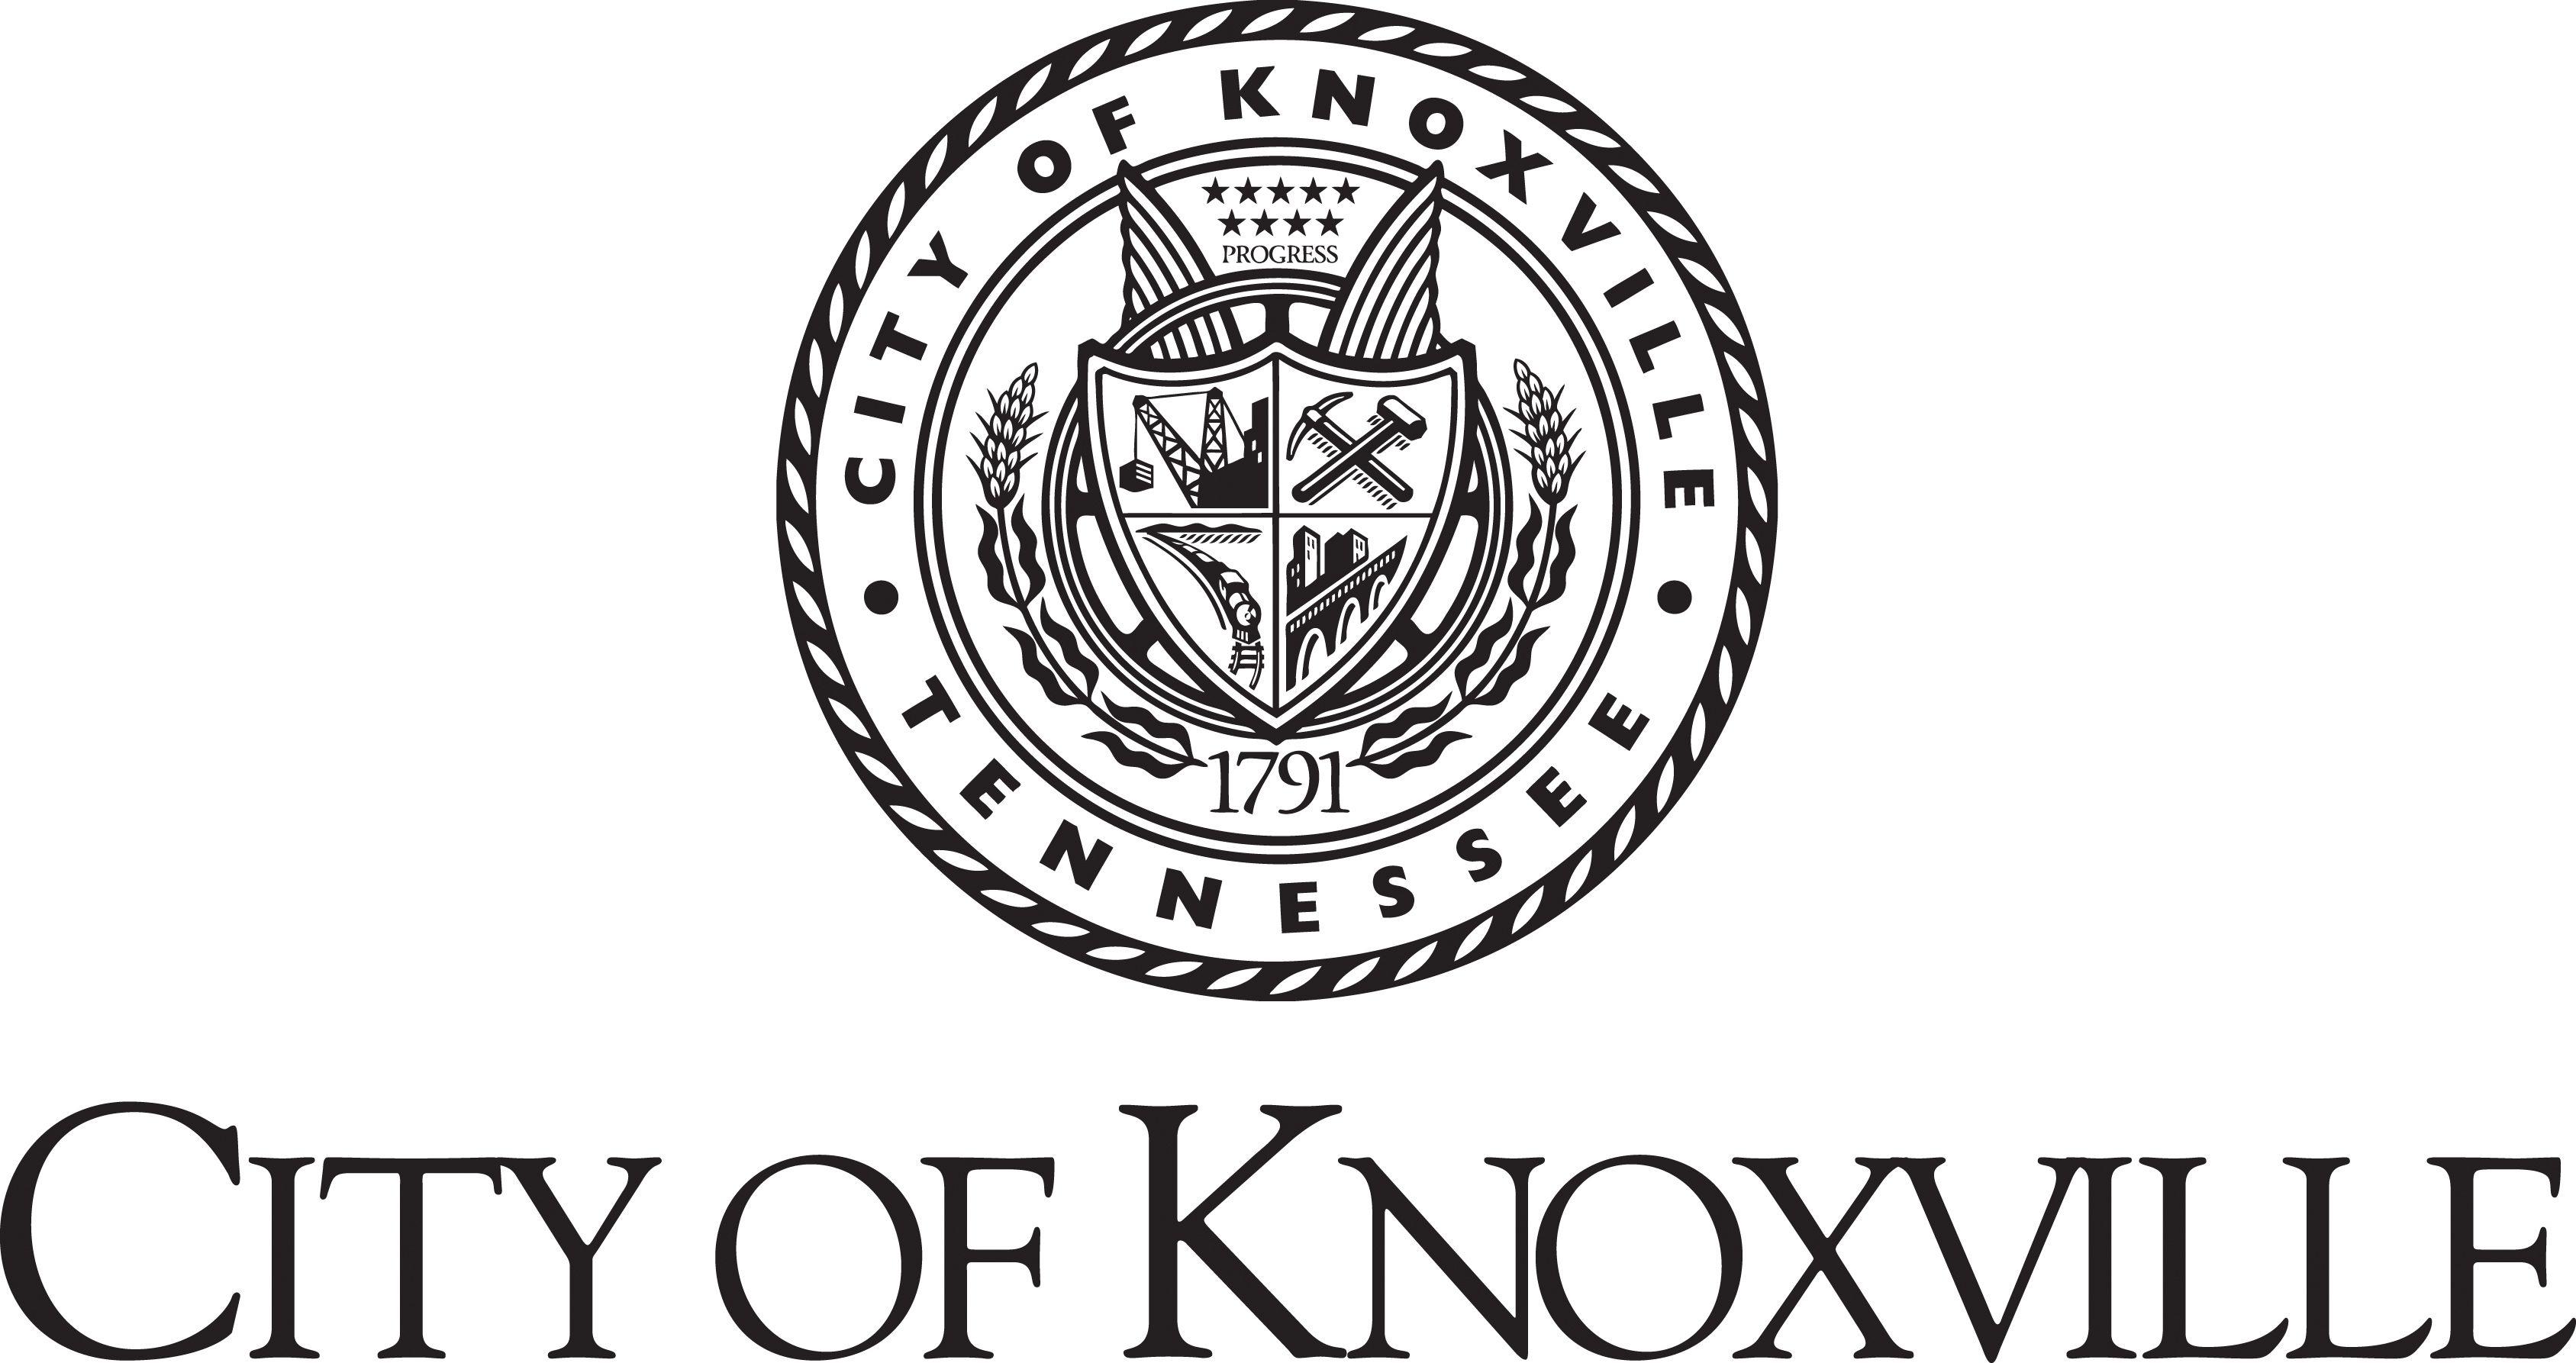 Knoxville Logo - Logos & Seals of Knoxville